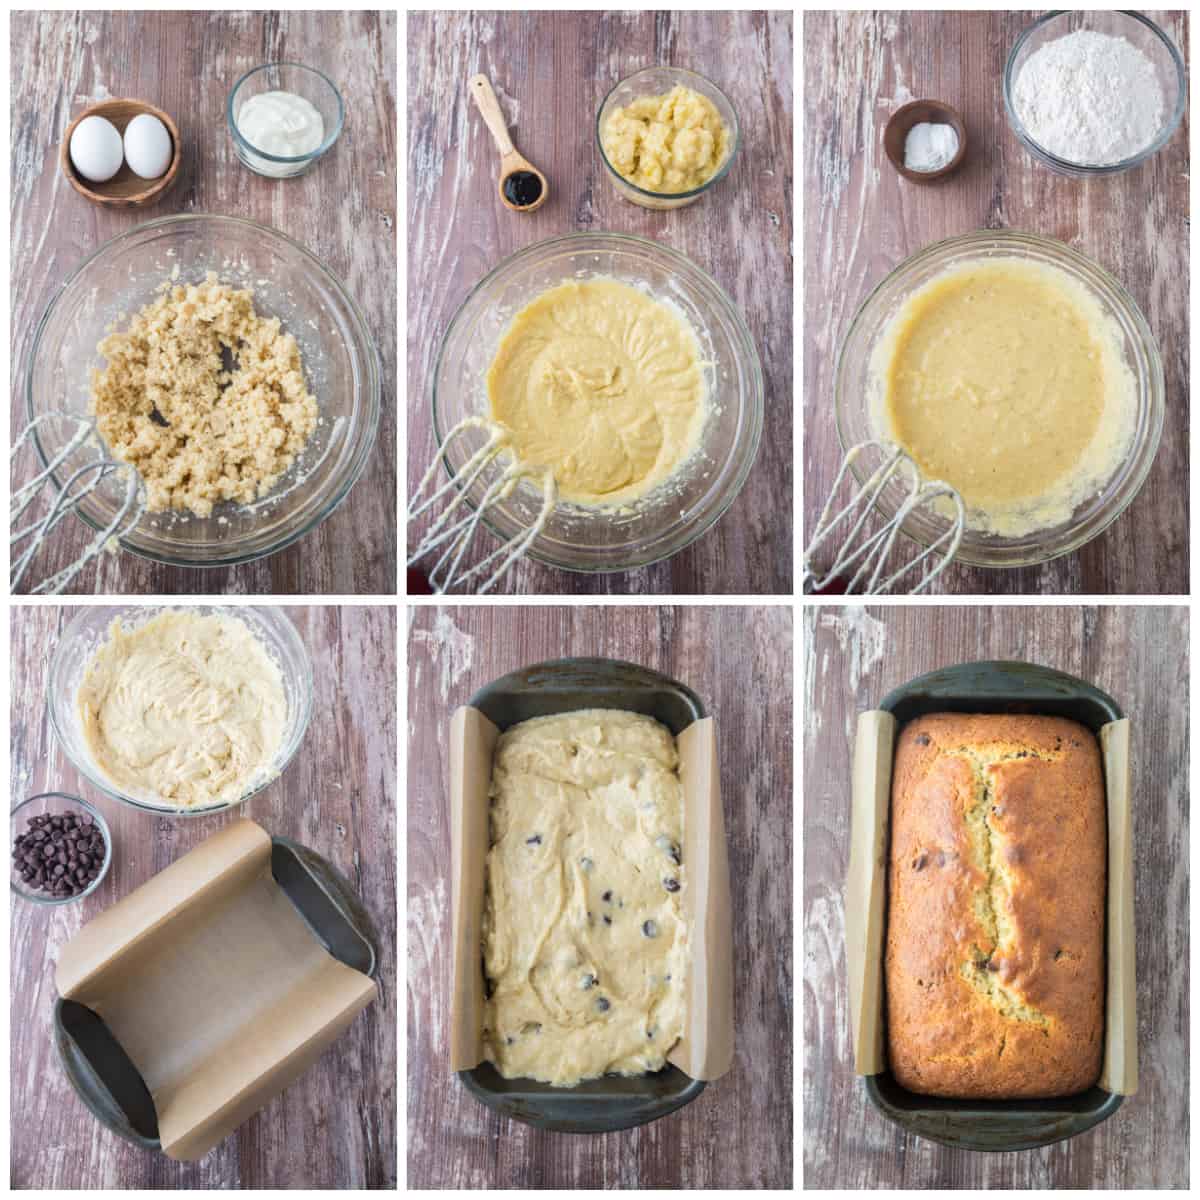 Step by step photos on how to make Chocolate Chip Banana Bread.